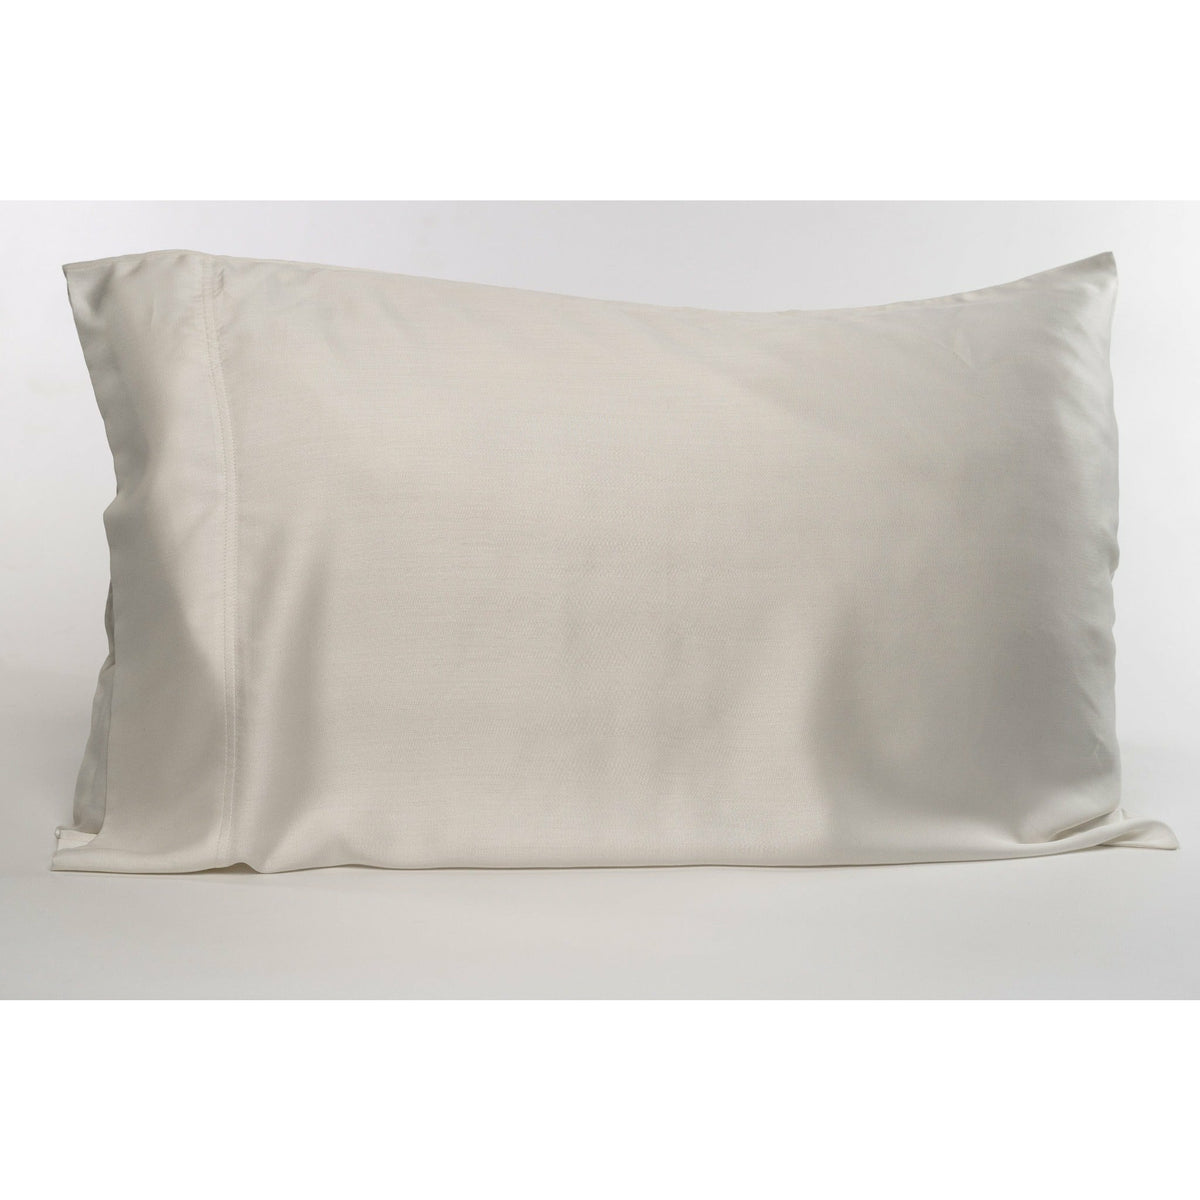 Standard Pillow Cases (Pack of 2)